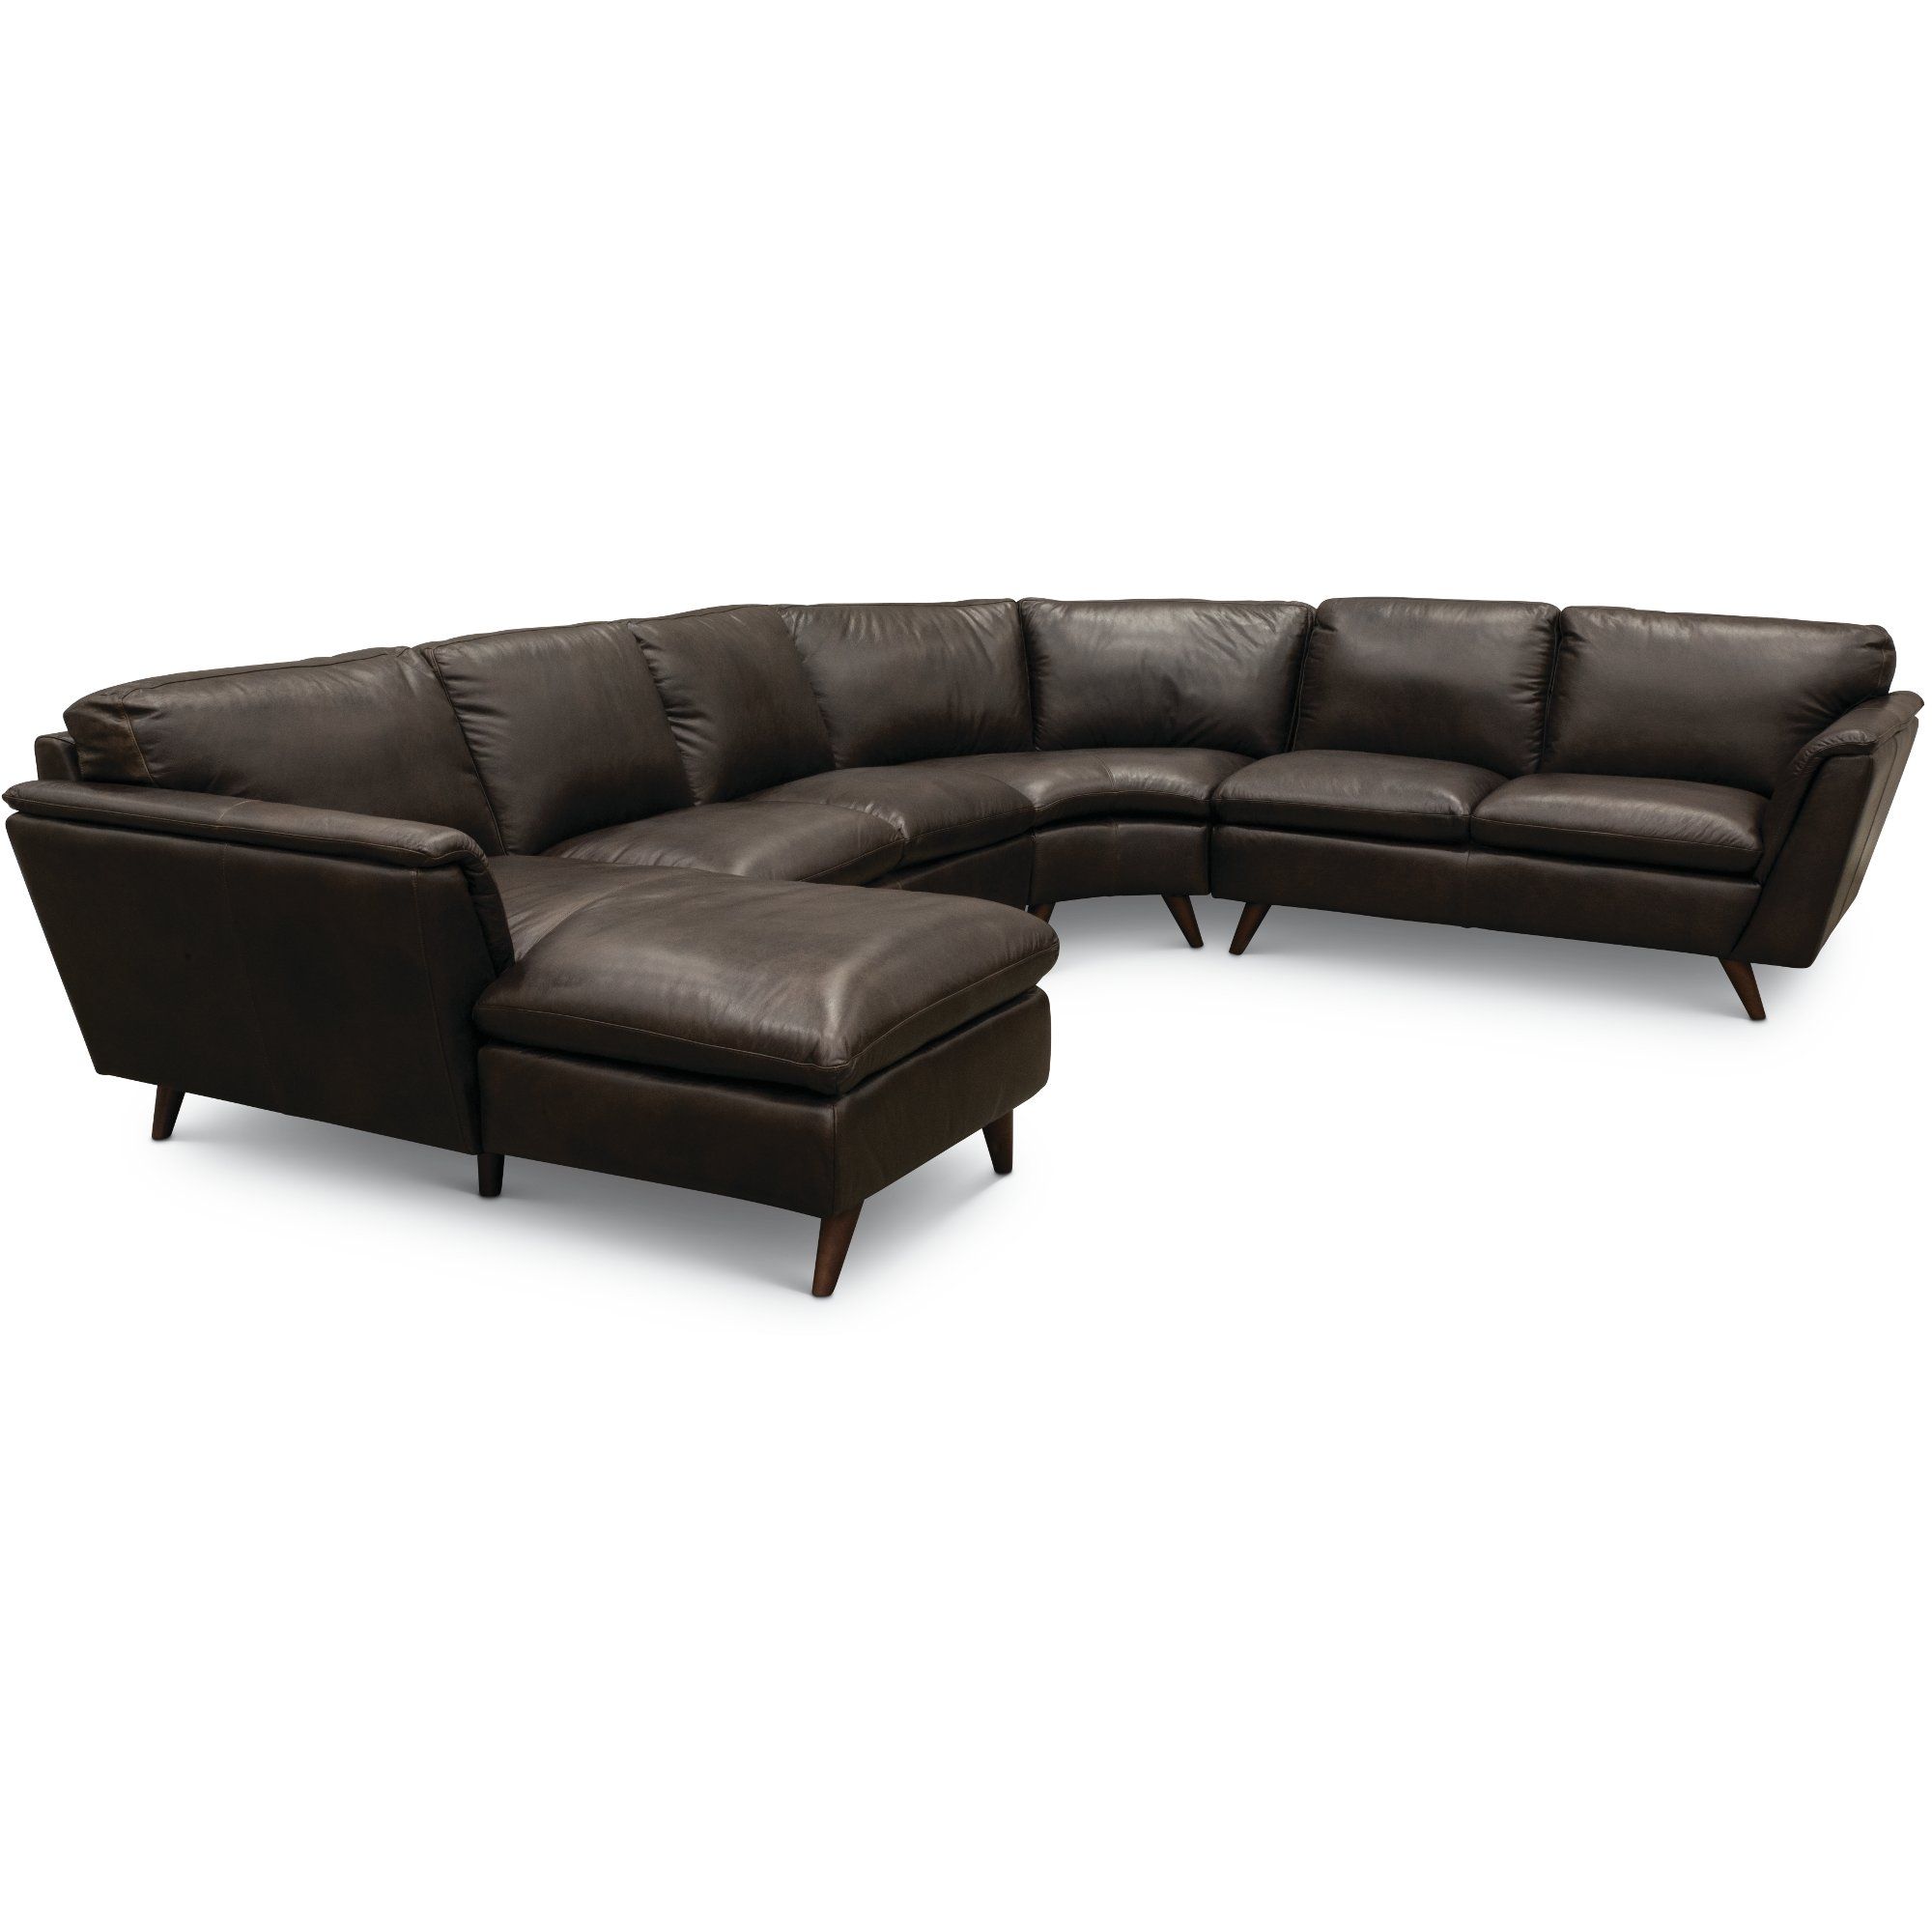 Brown Leather 4 Piece Sectional Sofa With Laf Chaise – Jeffrey | Rc Throughout Cosmos Grey 2 Piece Sectionals With Laf Chaise (View 10 of 25)